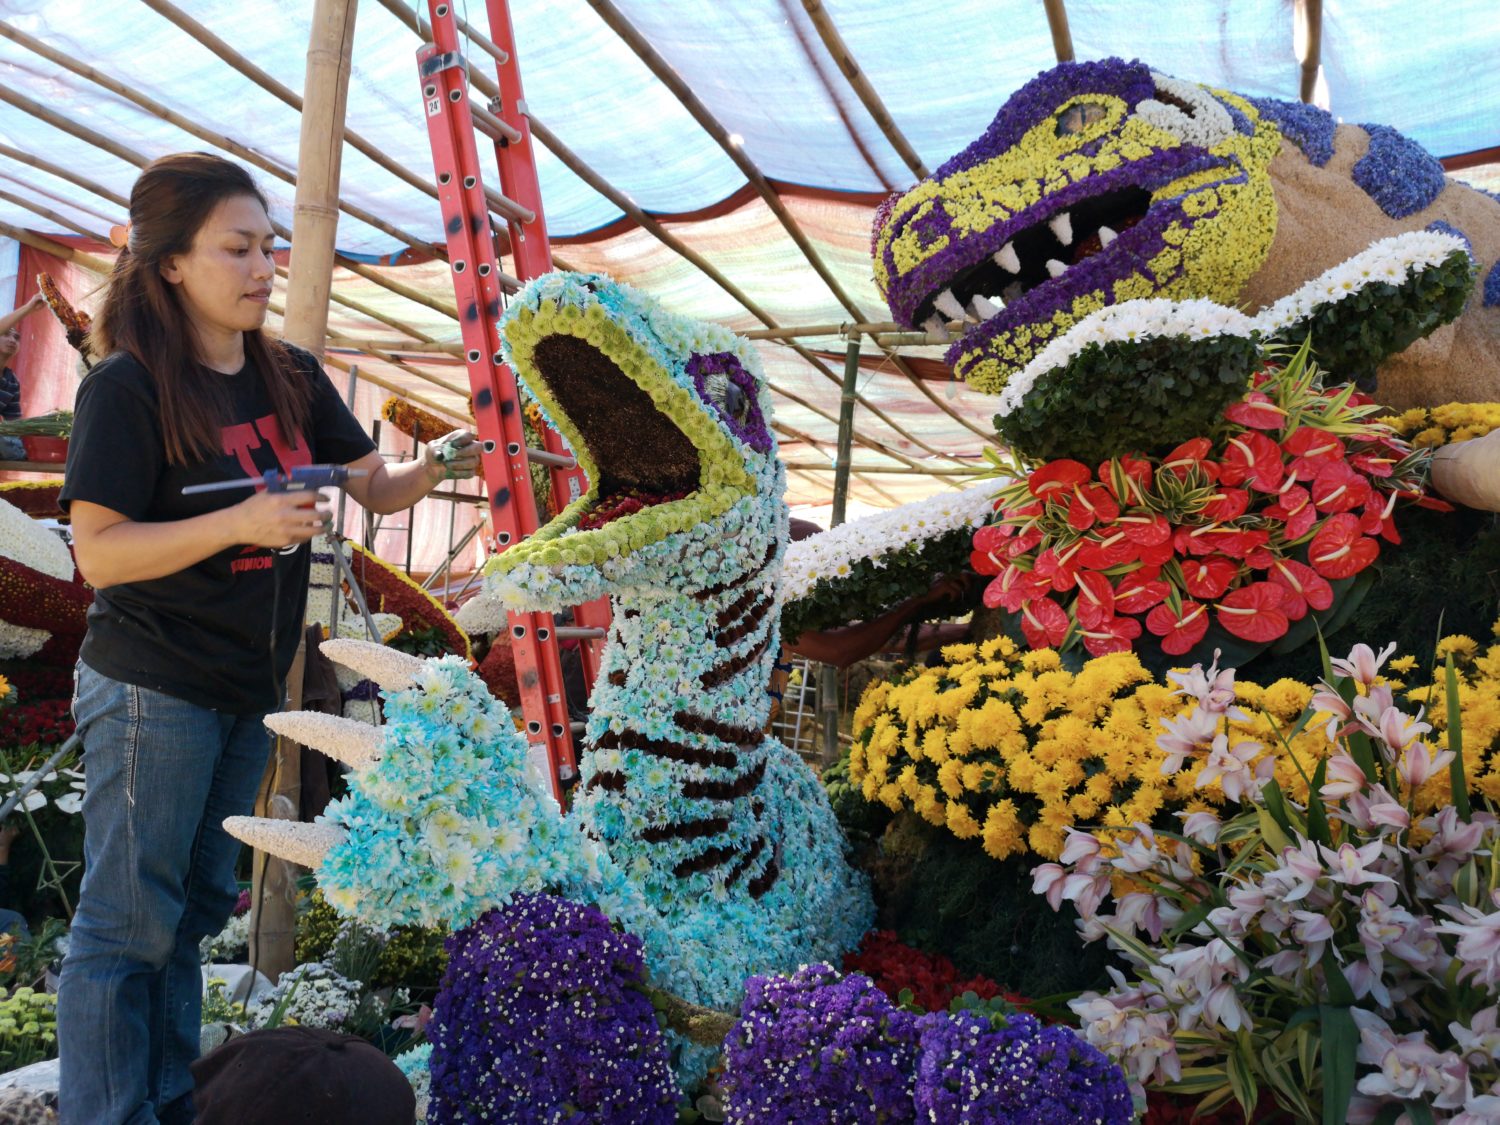 Baguio all set for flower float parade, street dancing on weekend